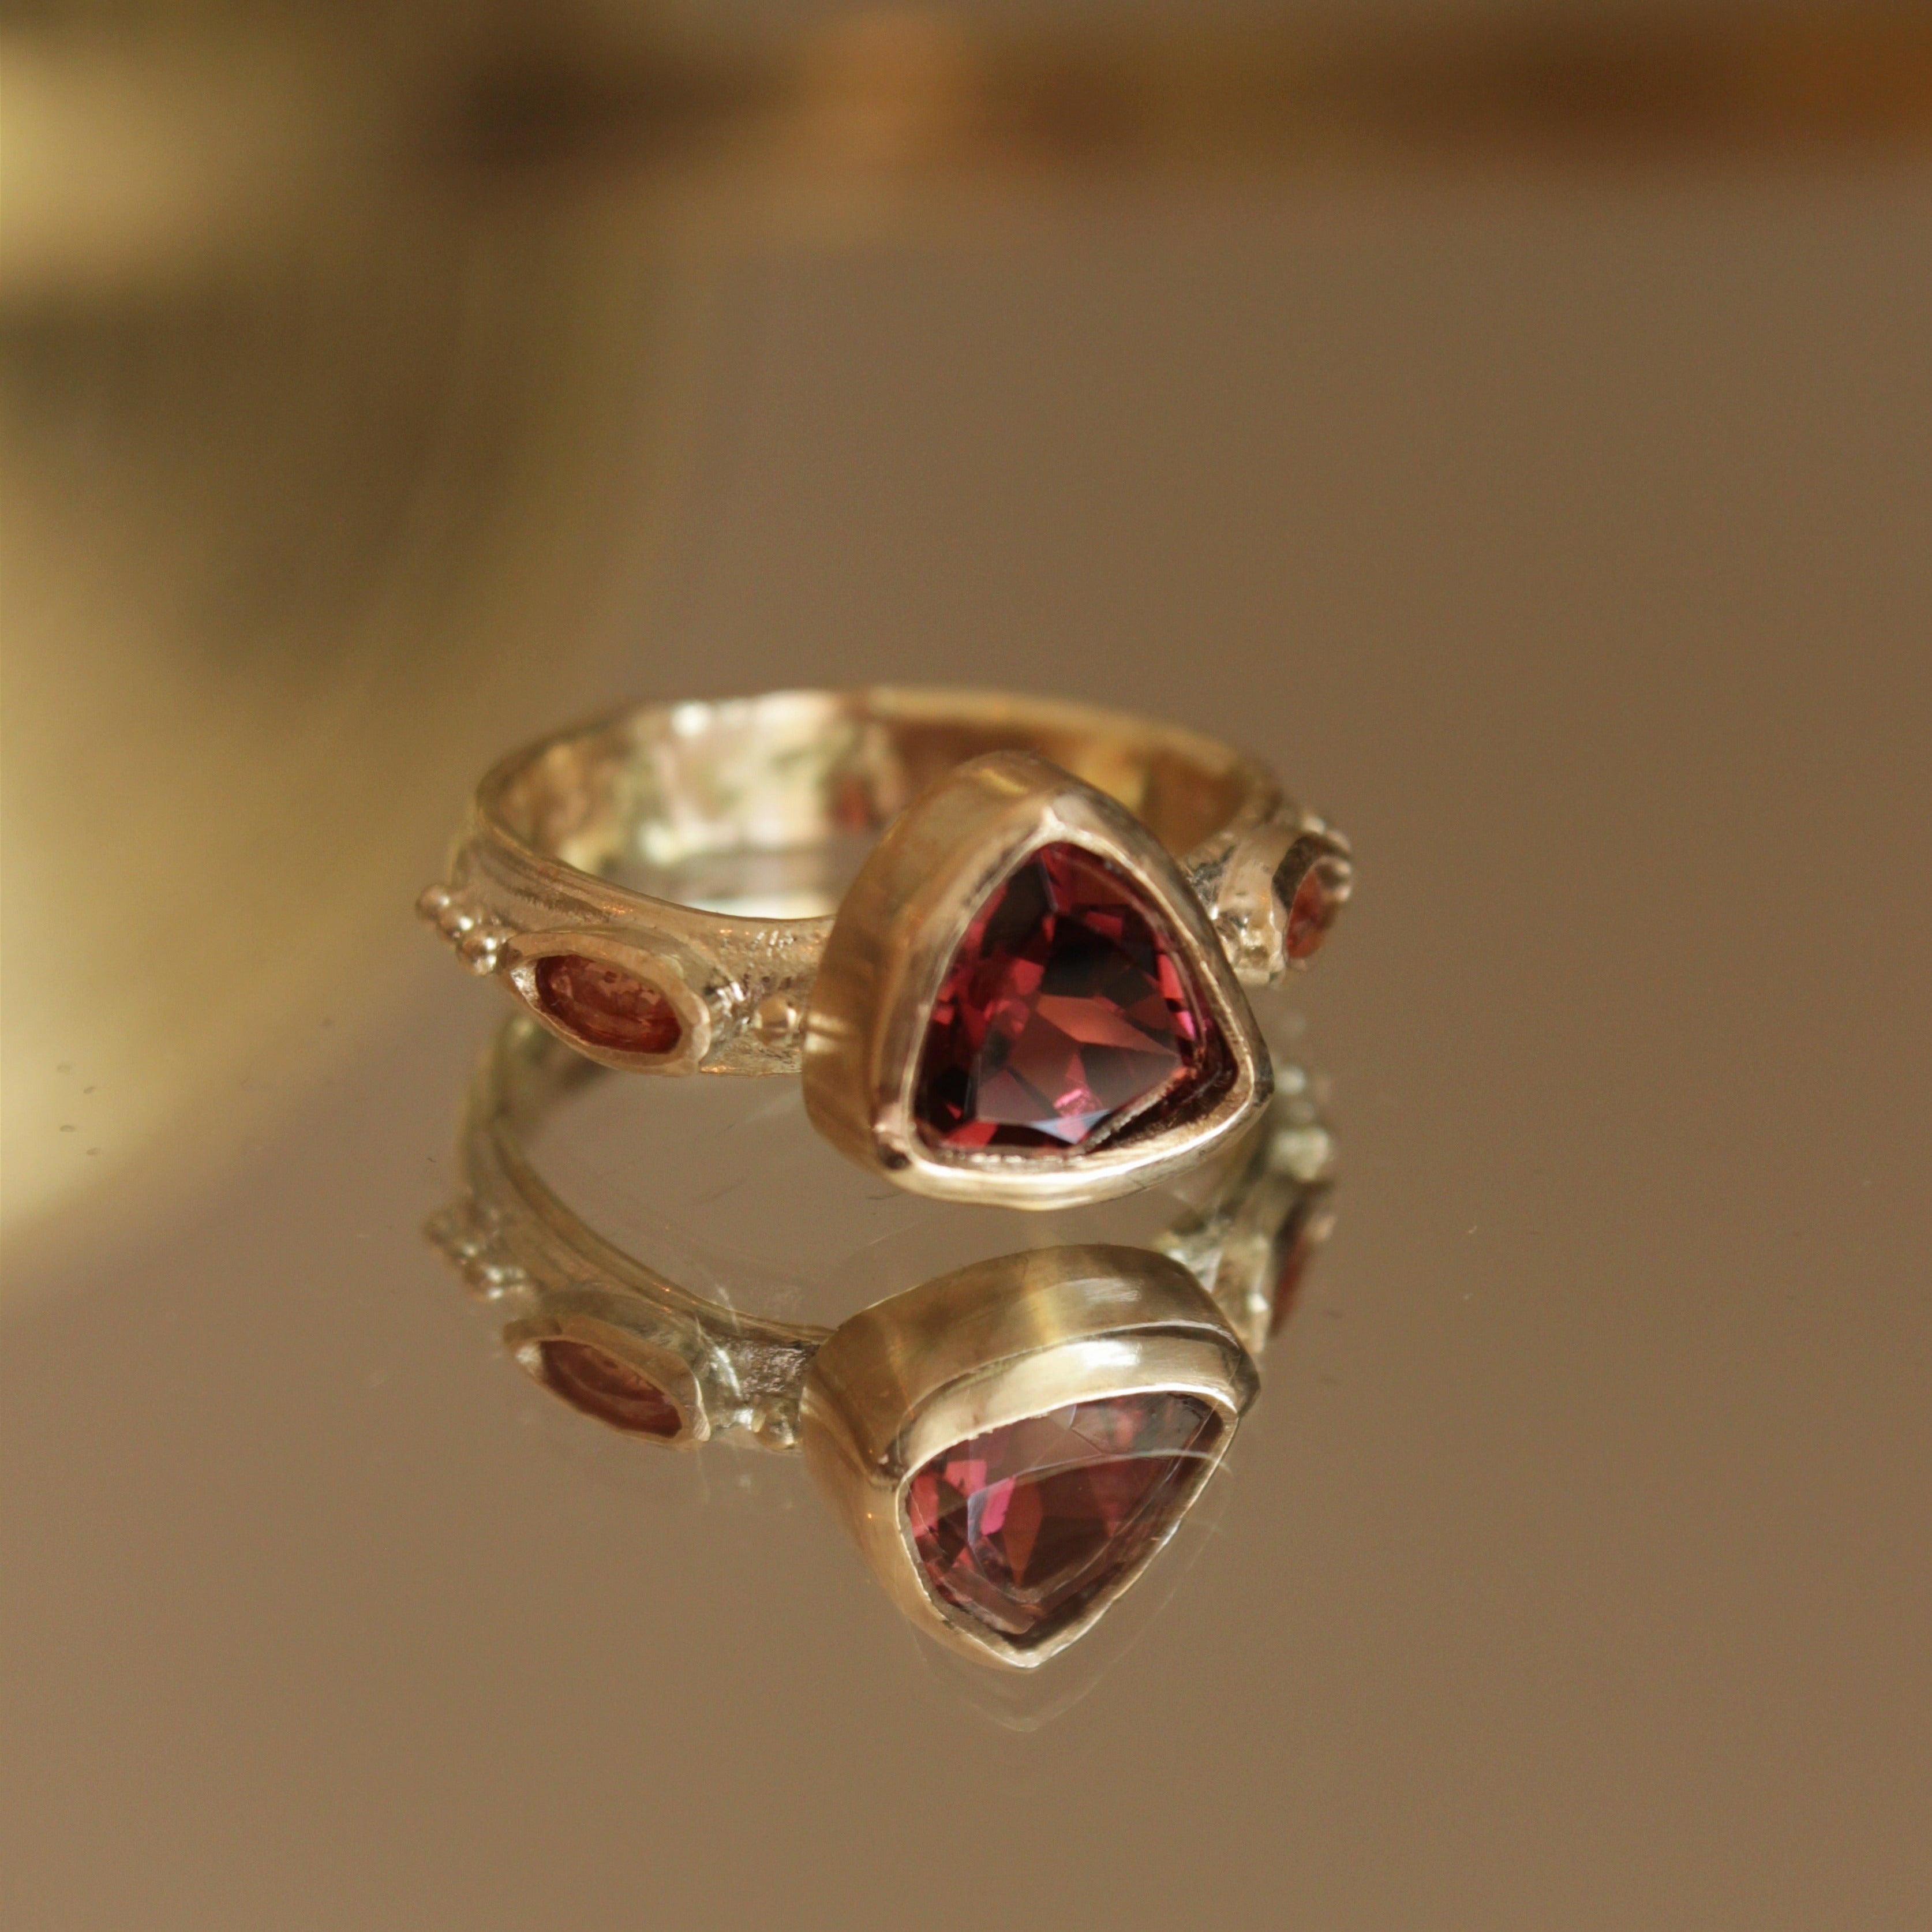 Alternative pink tourmaline engagement ring, handcrafted by Josie Mitchell jewellery in Frome, Somerset. Featuring a stunning deep pink tourmaline stone with peach coloured sapphires on either side and delicate gold granules.